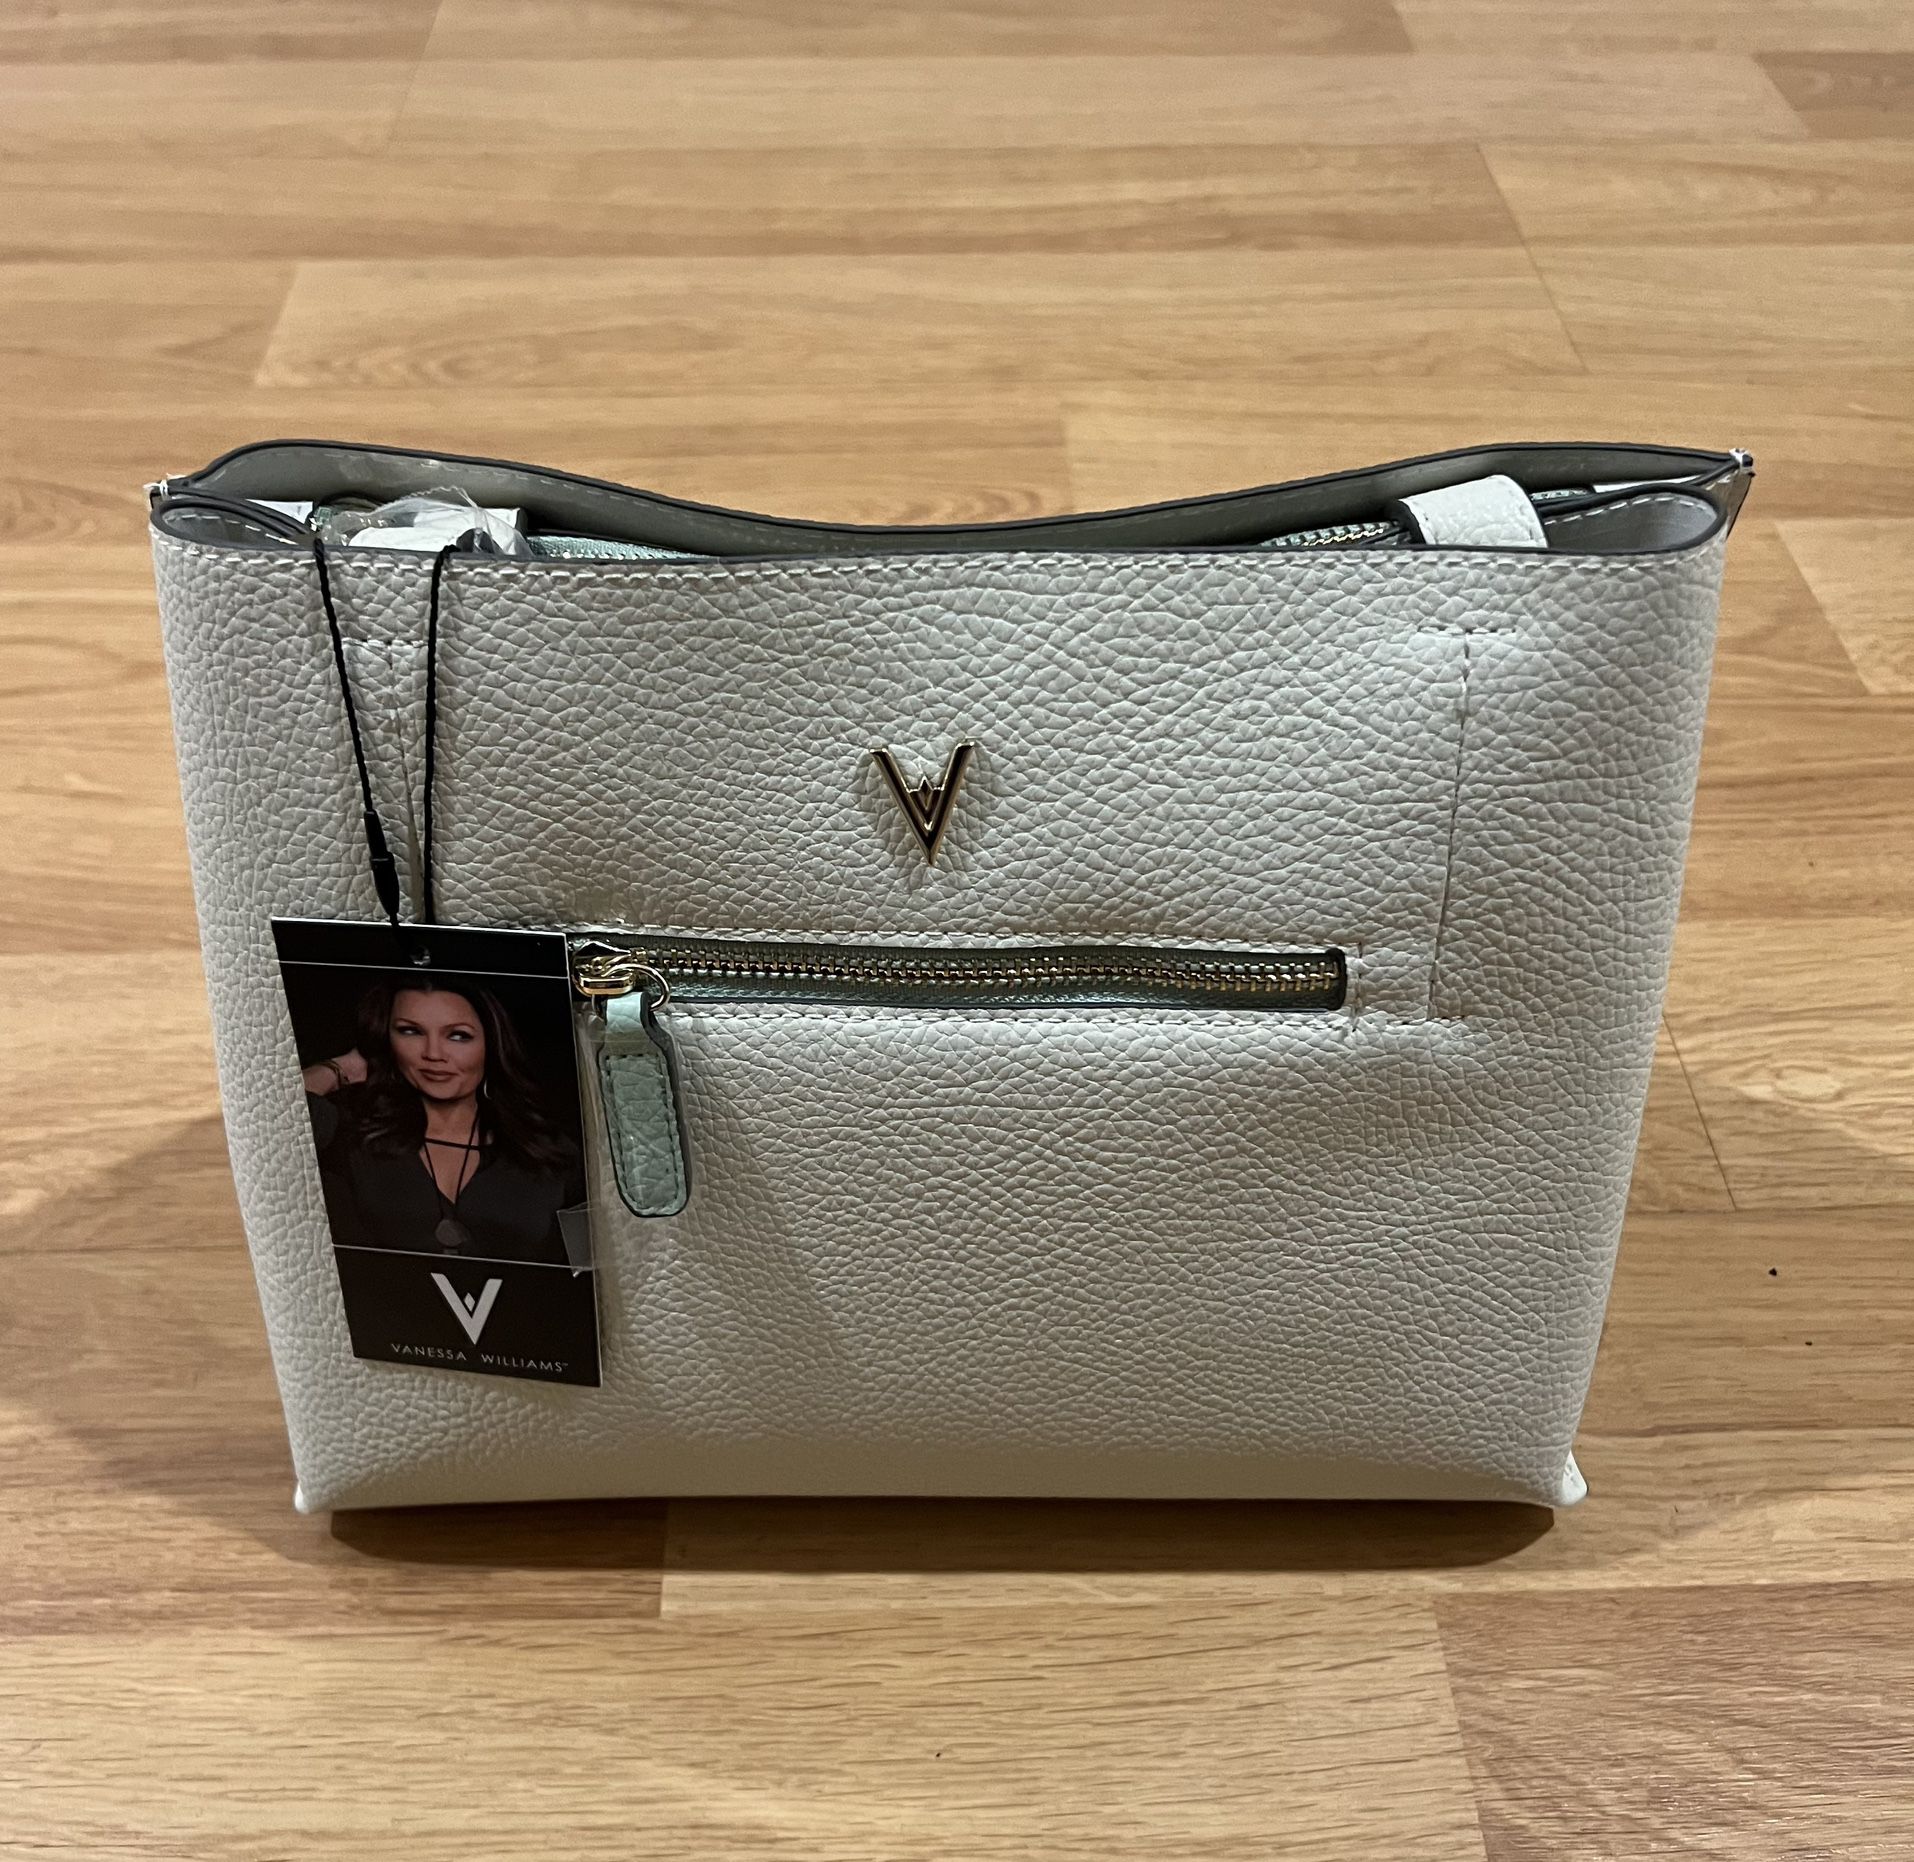 NEW Tote Bag by Vanessa Williams with Matching Wallet